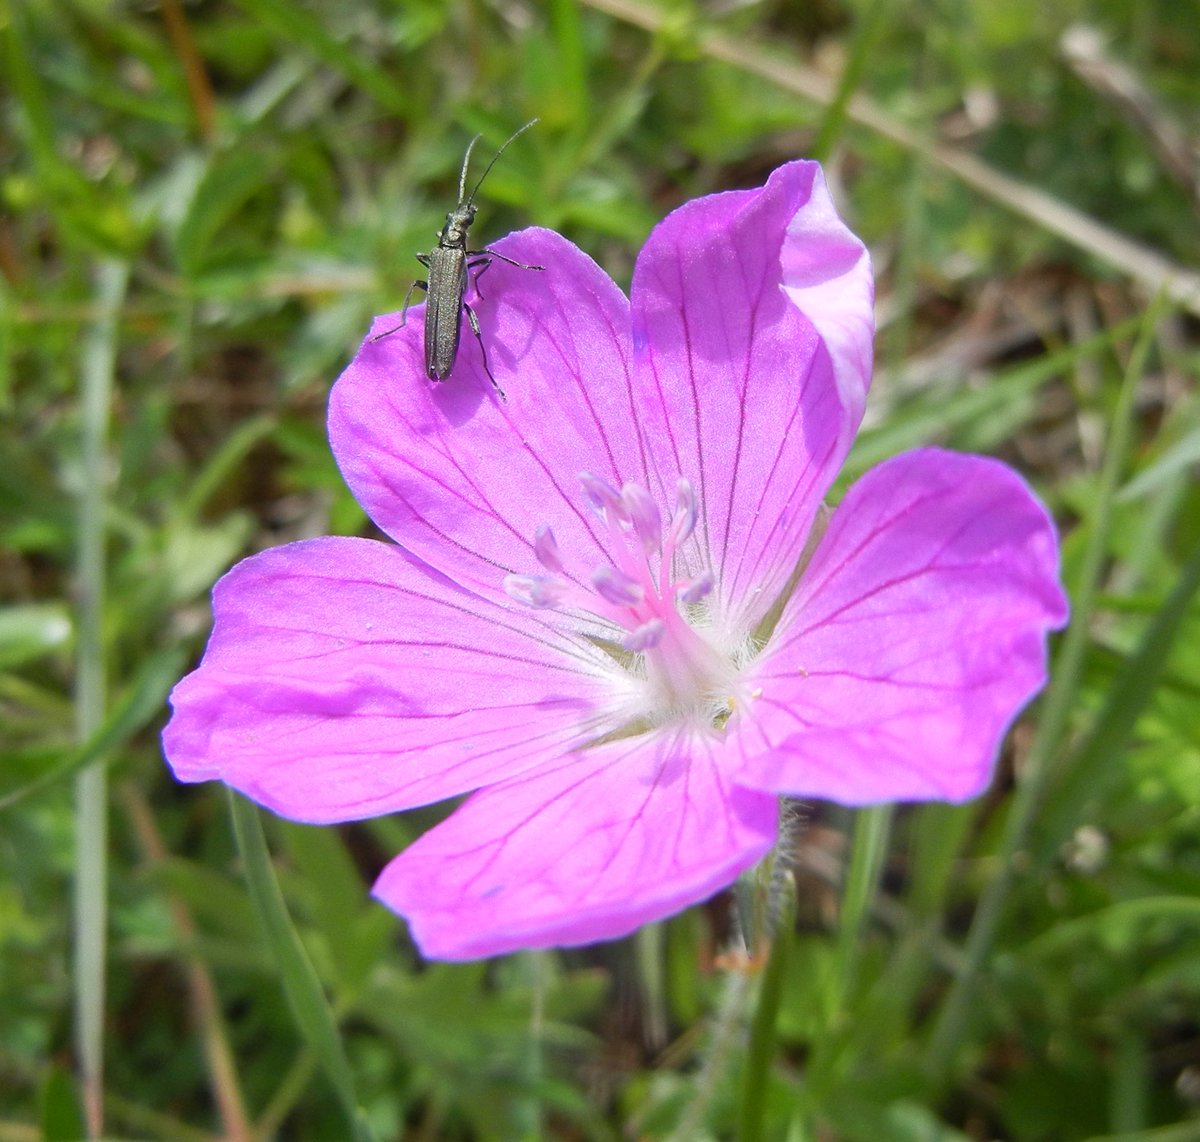 A False Blister Beetle (Oedemera lurida?) on Bloody Cranesbill (Geranium sanguineum) from Waterswallows, Buxton this week #wildflowerhour #NationalInsectWeek @DaNES_Insects